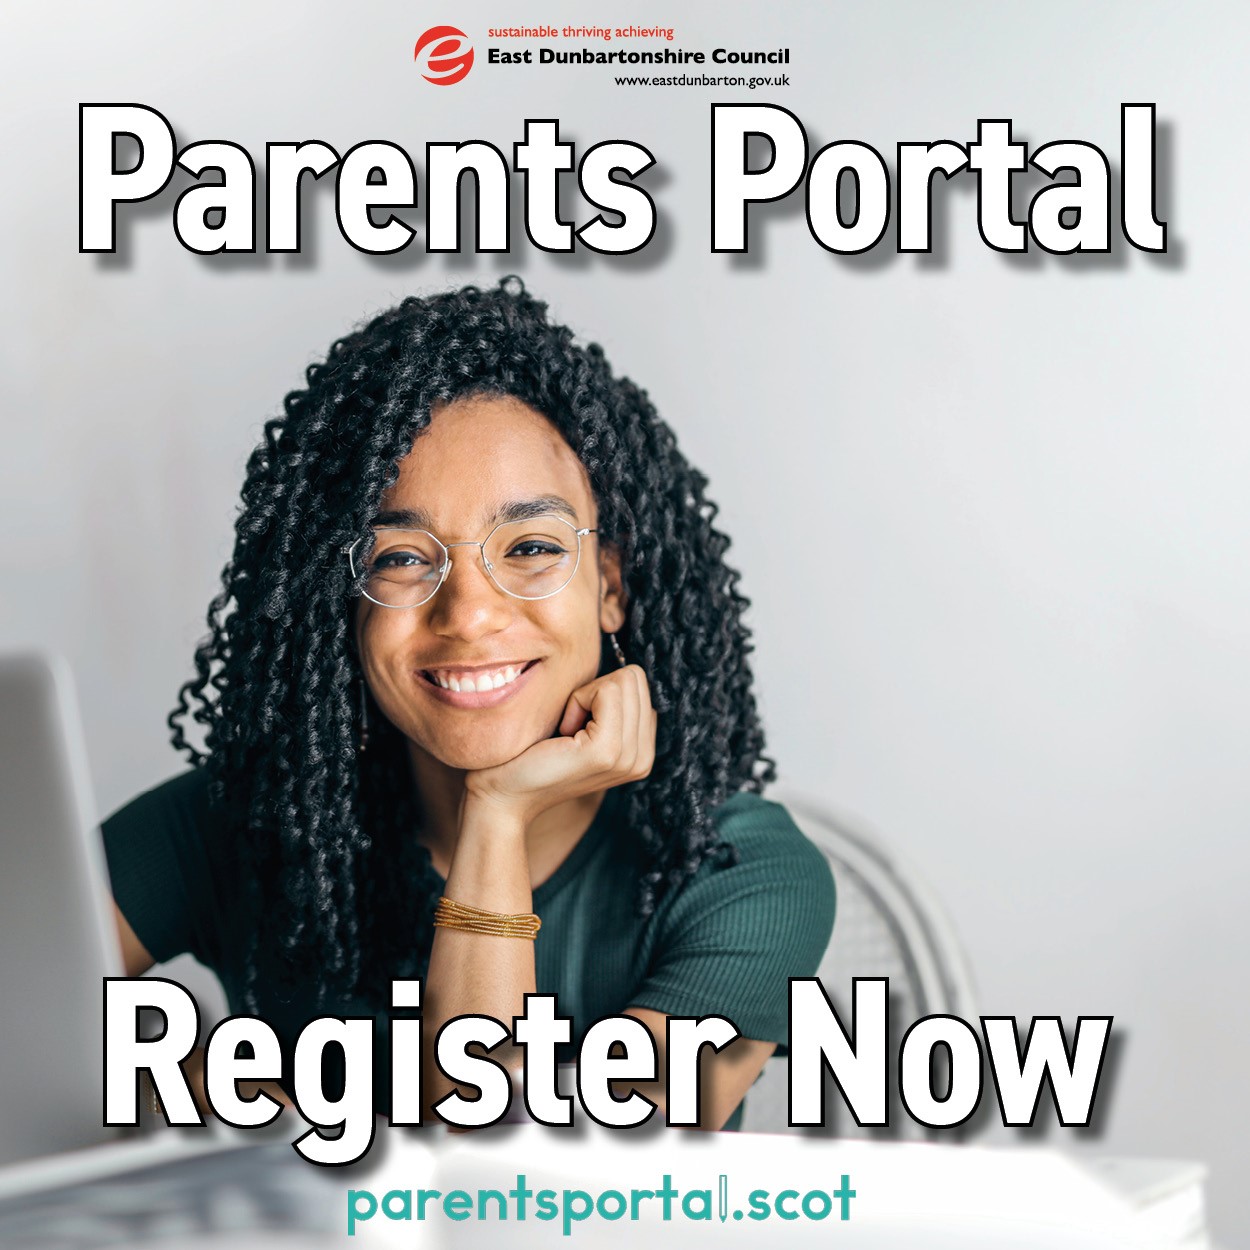 on a grey background a women sits leaning on a desk of a laptop smiling. In white text is written parents portal register now with parentsportal.scot written in blue at the bottom. At the top of the image is the east dunbartonshire logo